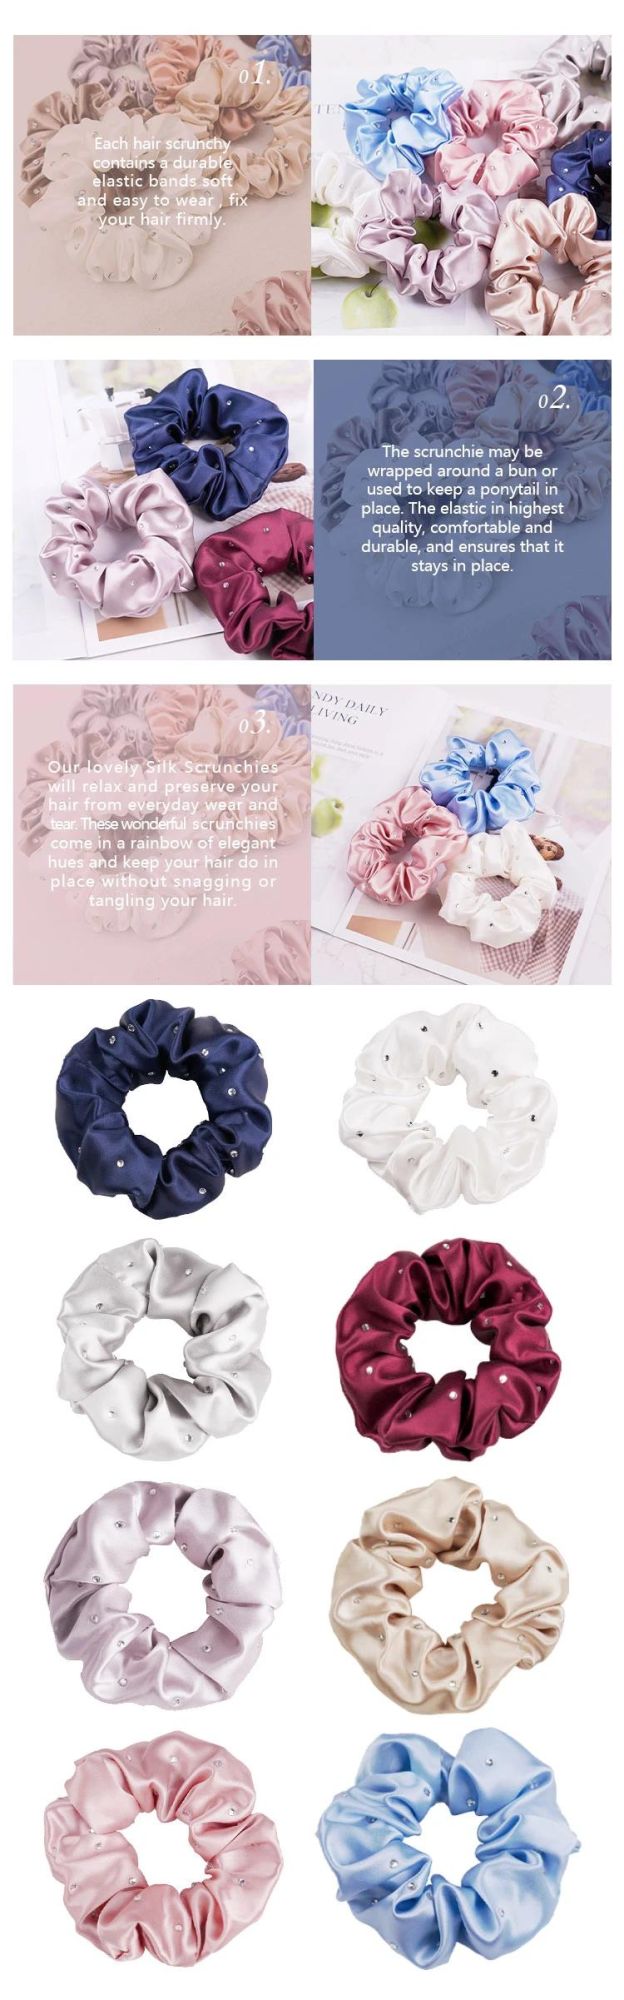 Customize Accept for Crystal Silk Scrunchies for High Quality Fashionable Style